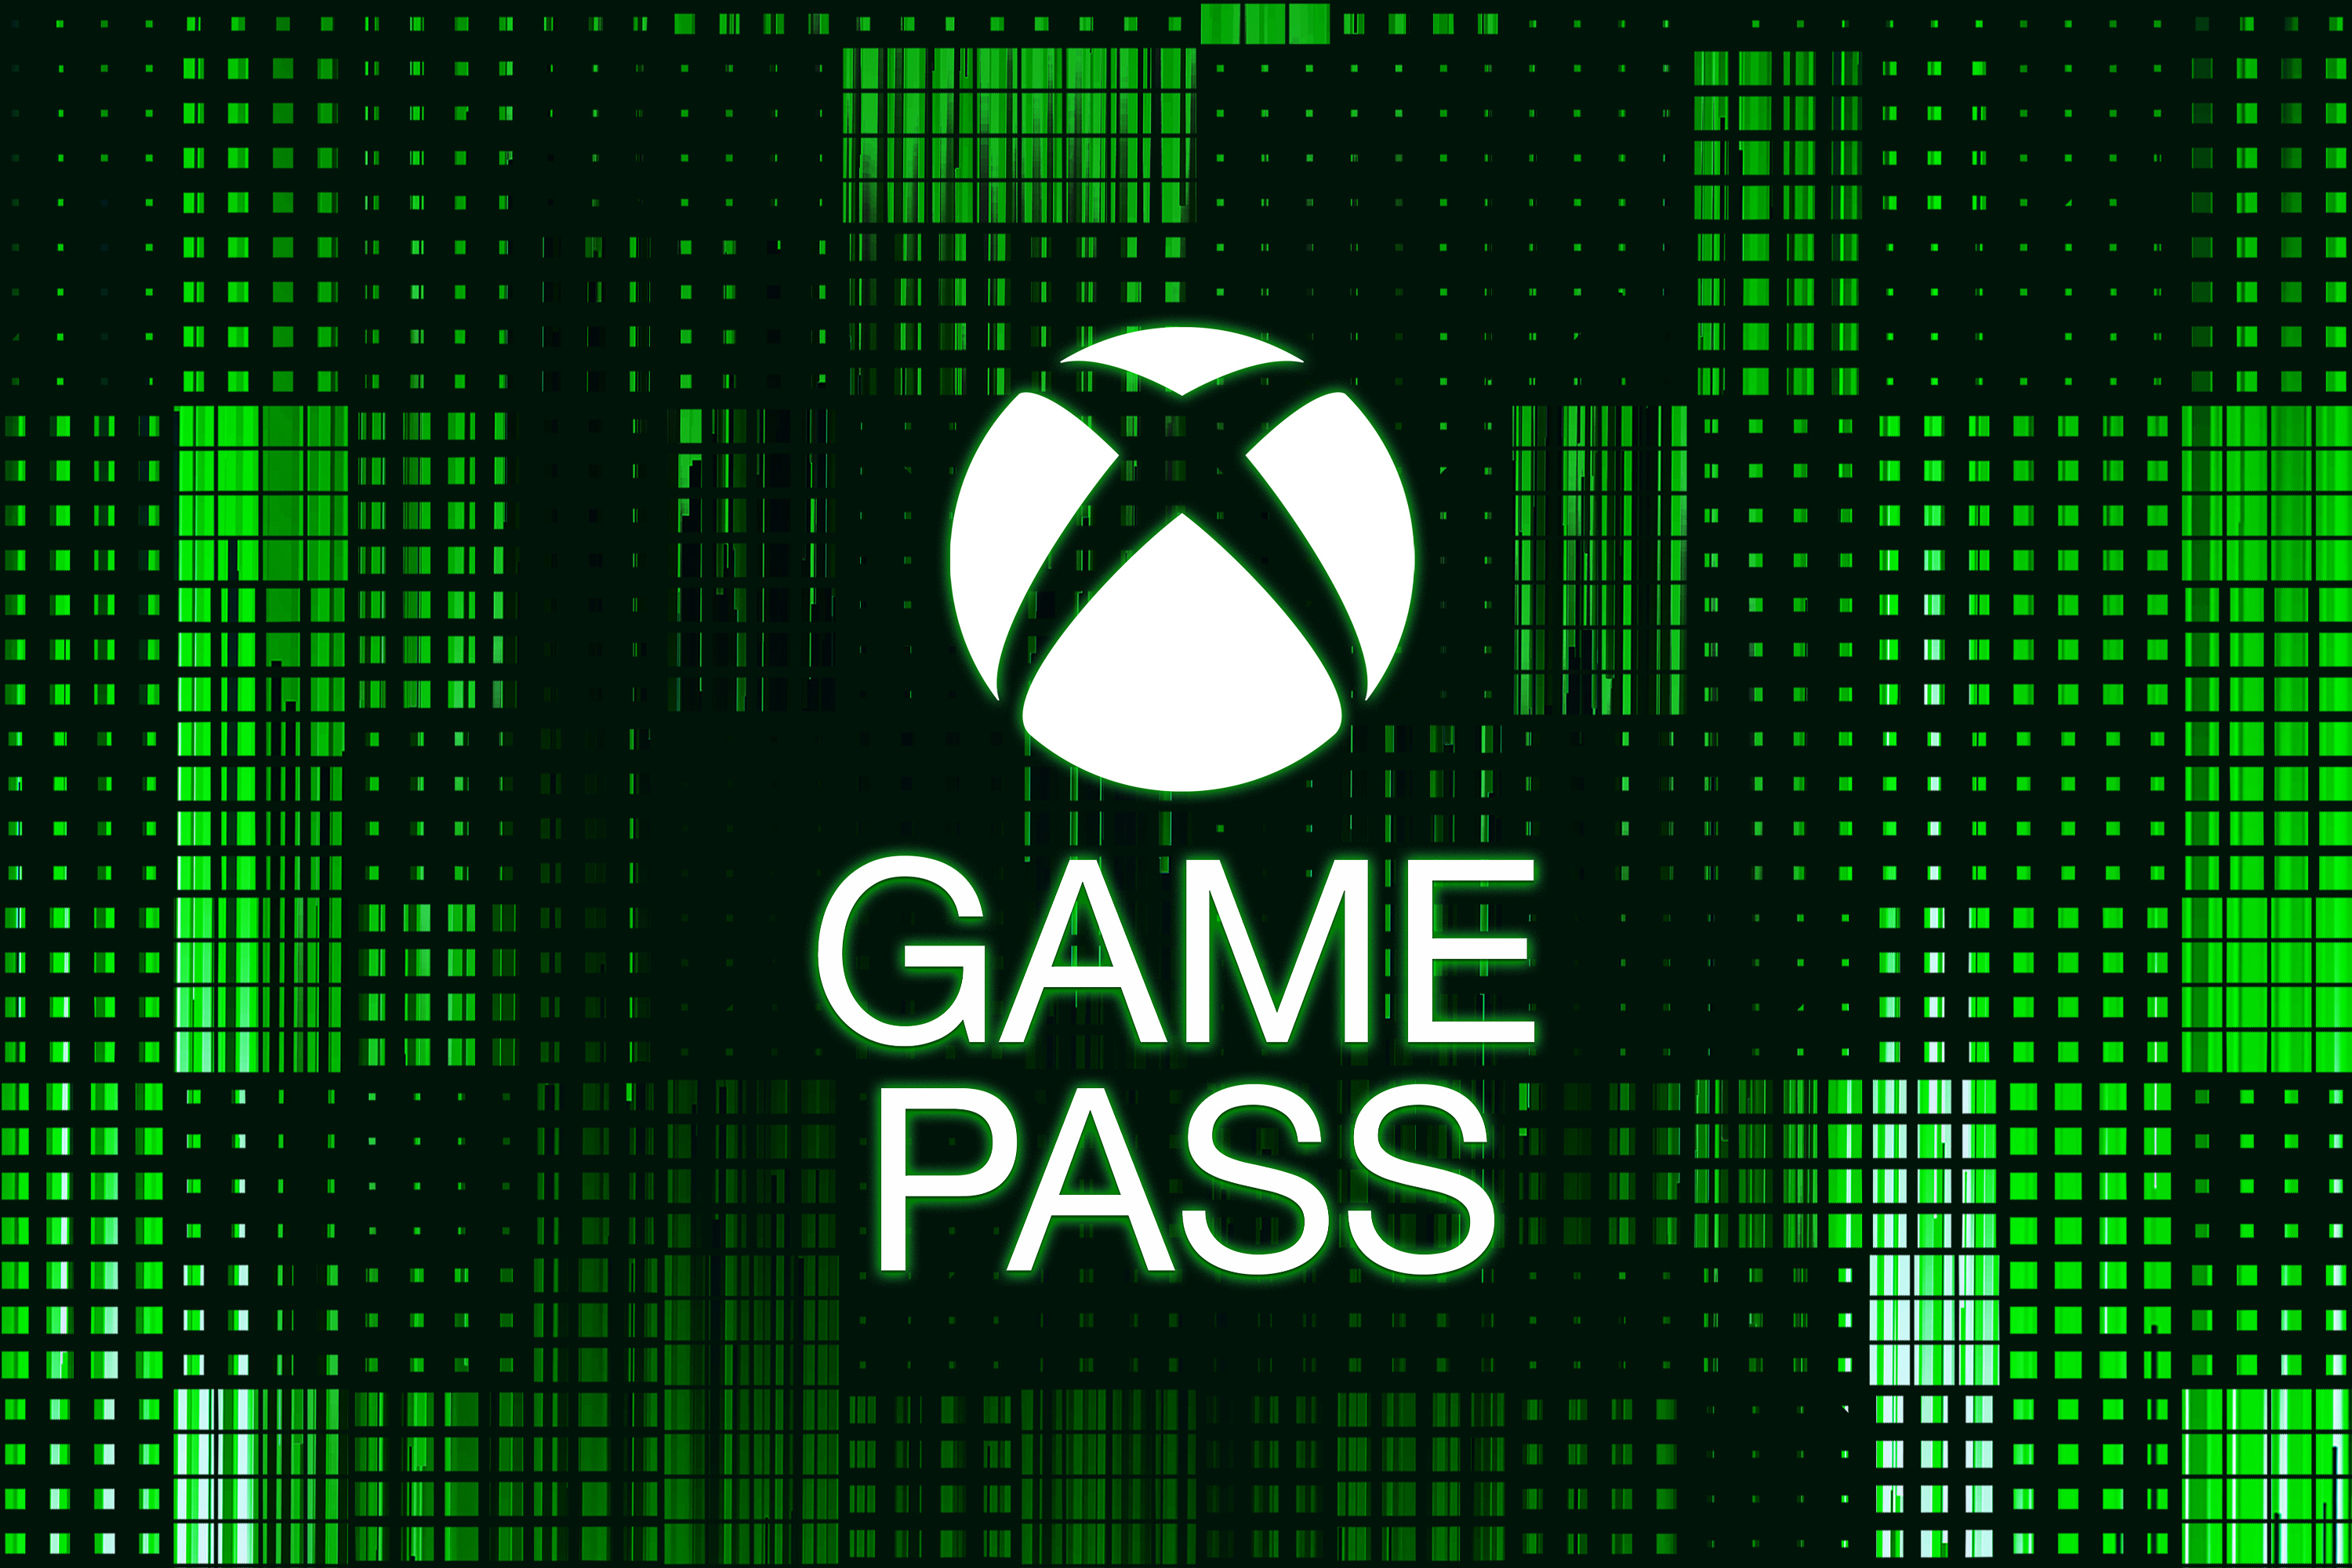 Microsoft Game Pass logo on green patterned background